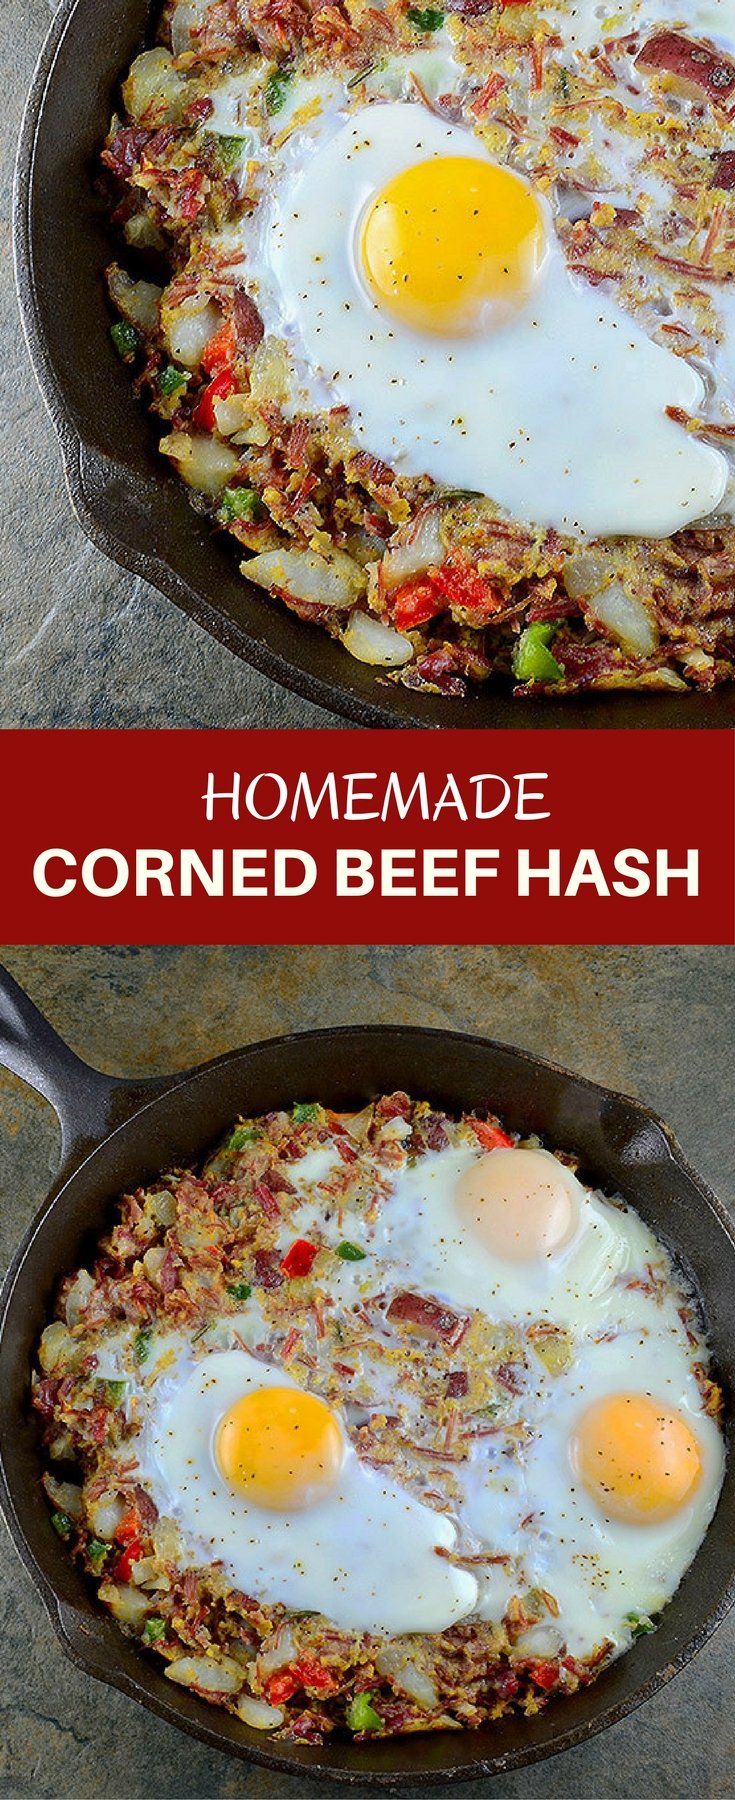 Corned Beef Hash is a delicious breakfast you can whip up from your leftover St. Patrick's feast! A hearty combination of corned beef, potatoes, bell peppers, and soft yolks, it makes a great dinner, too!